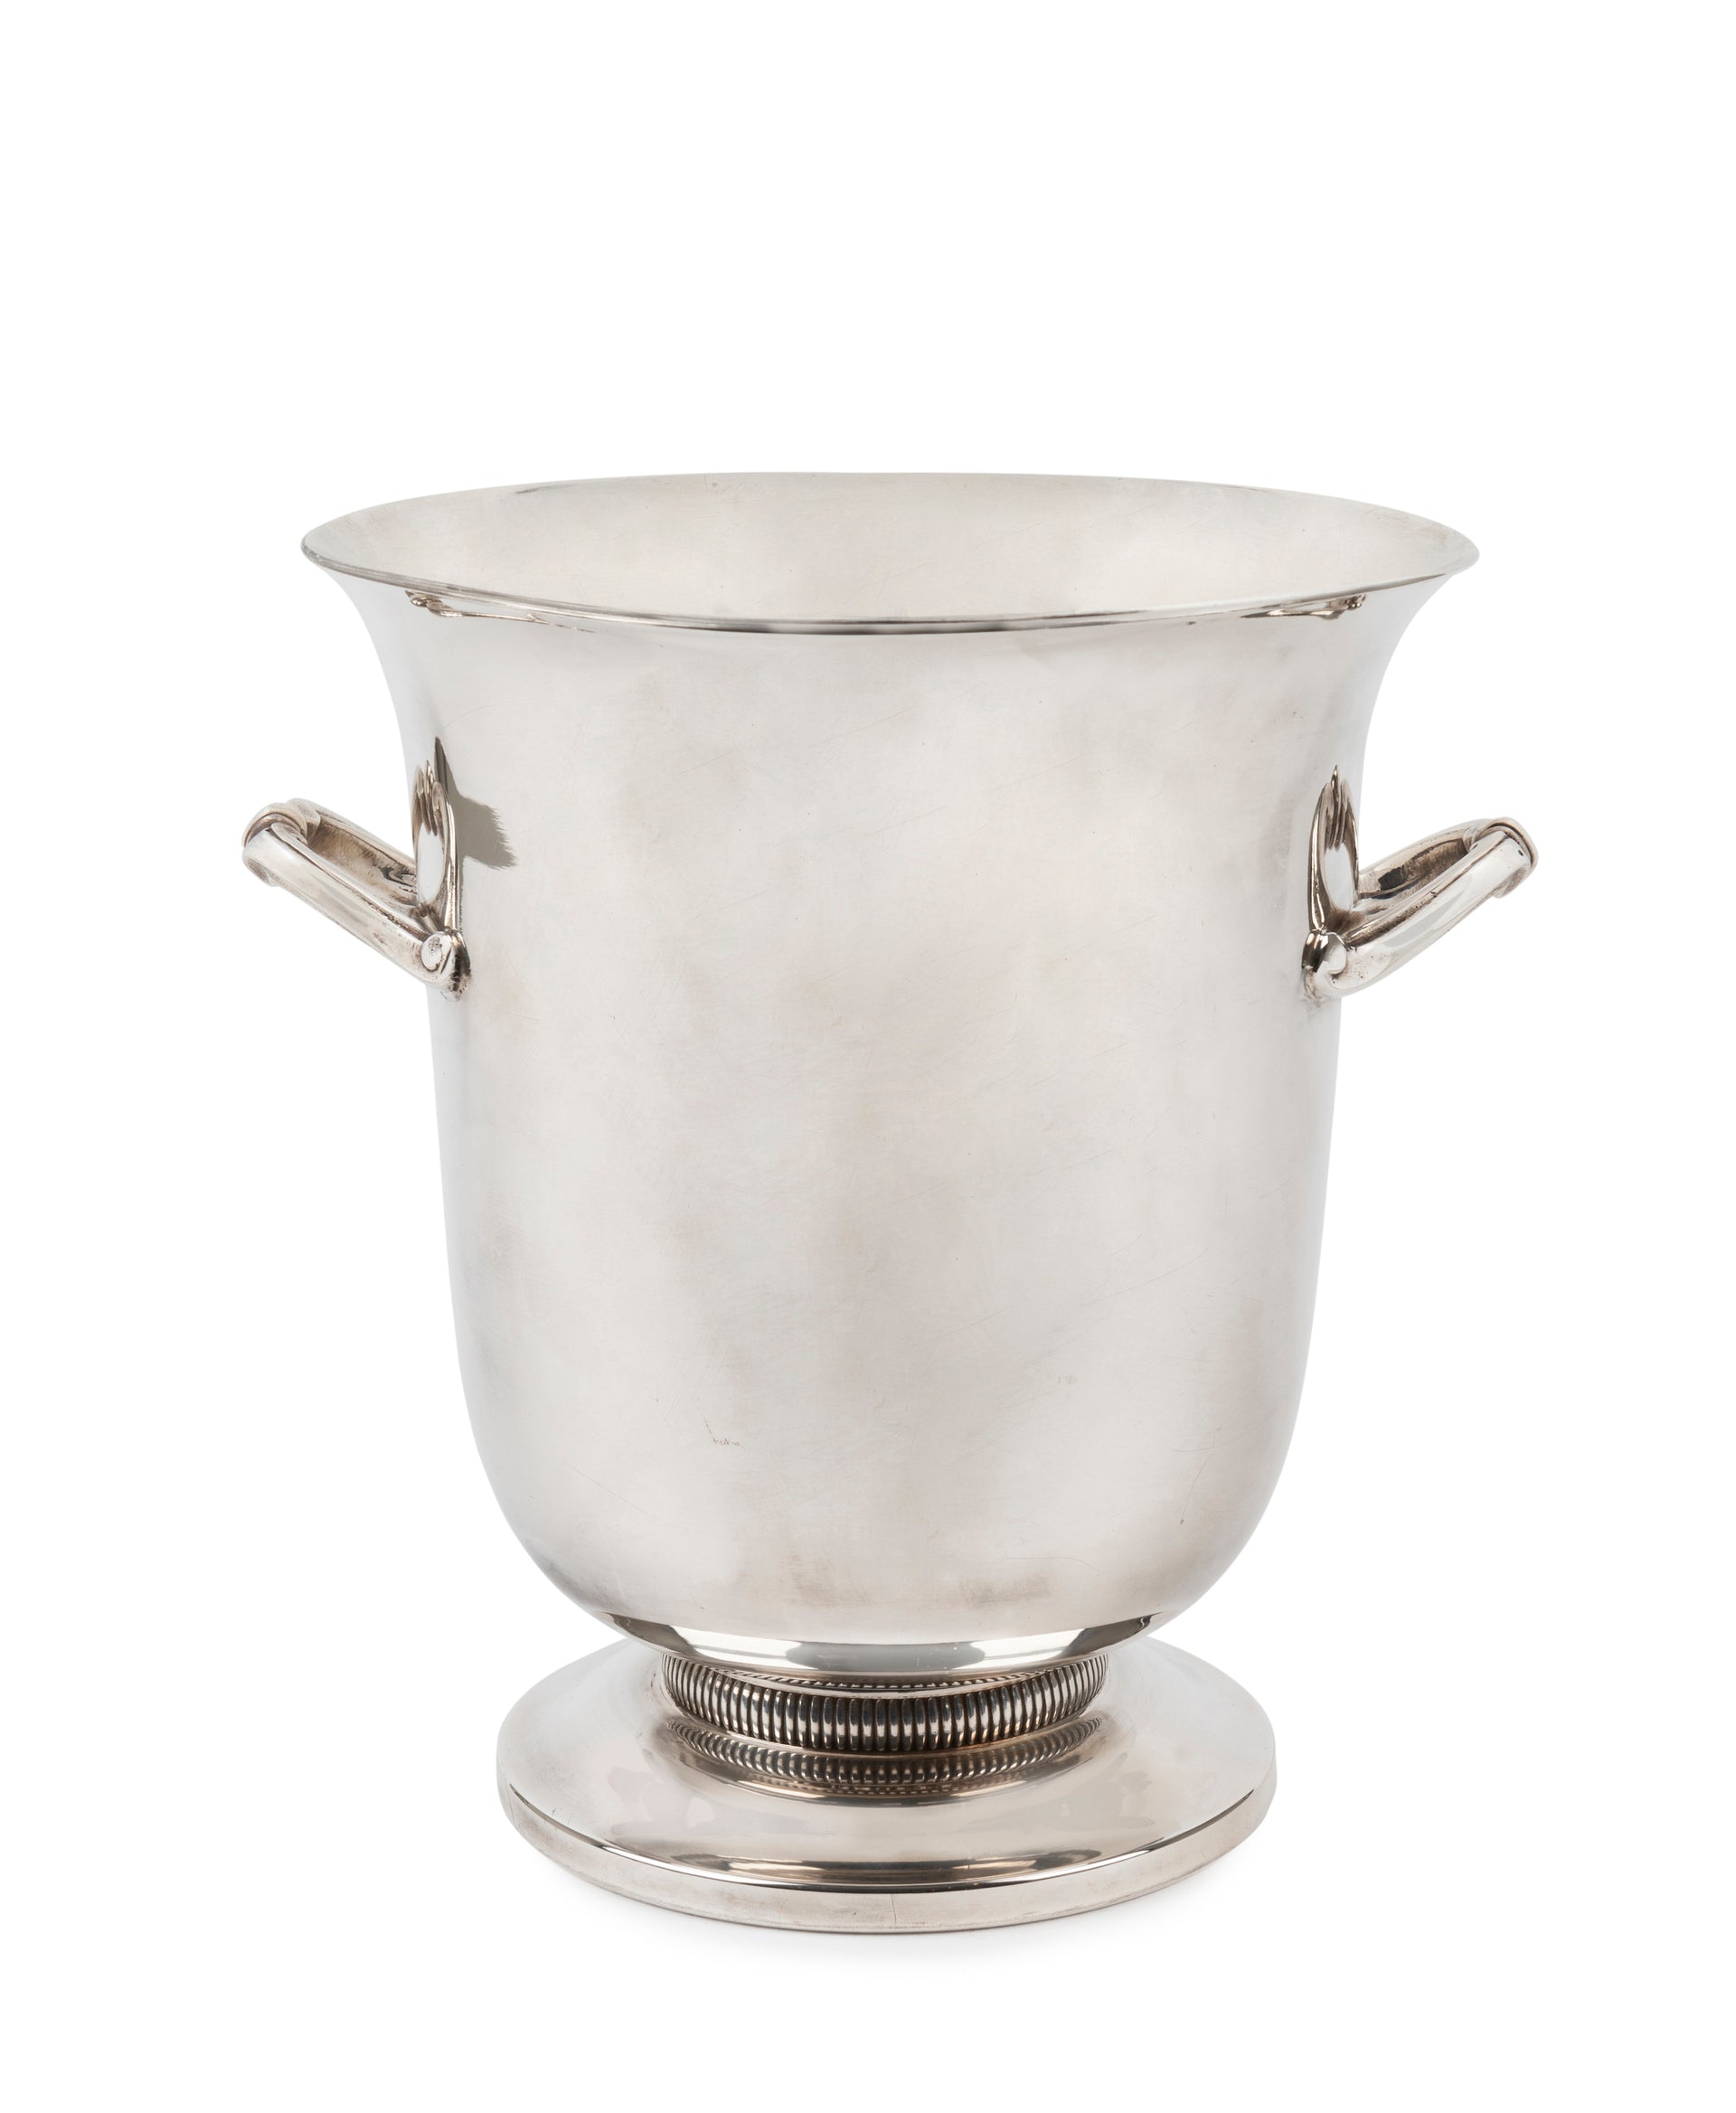 SOLD A French vintage silver plated twin handled wine cooler